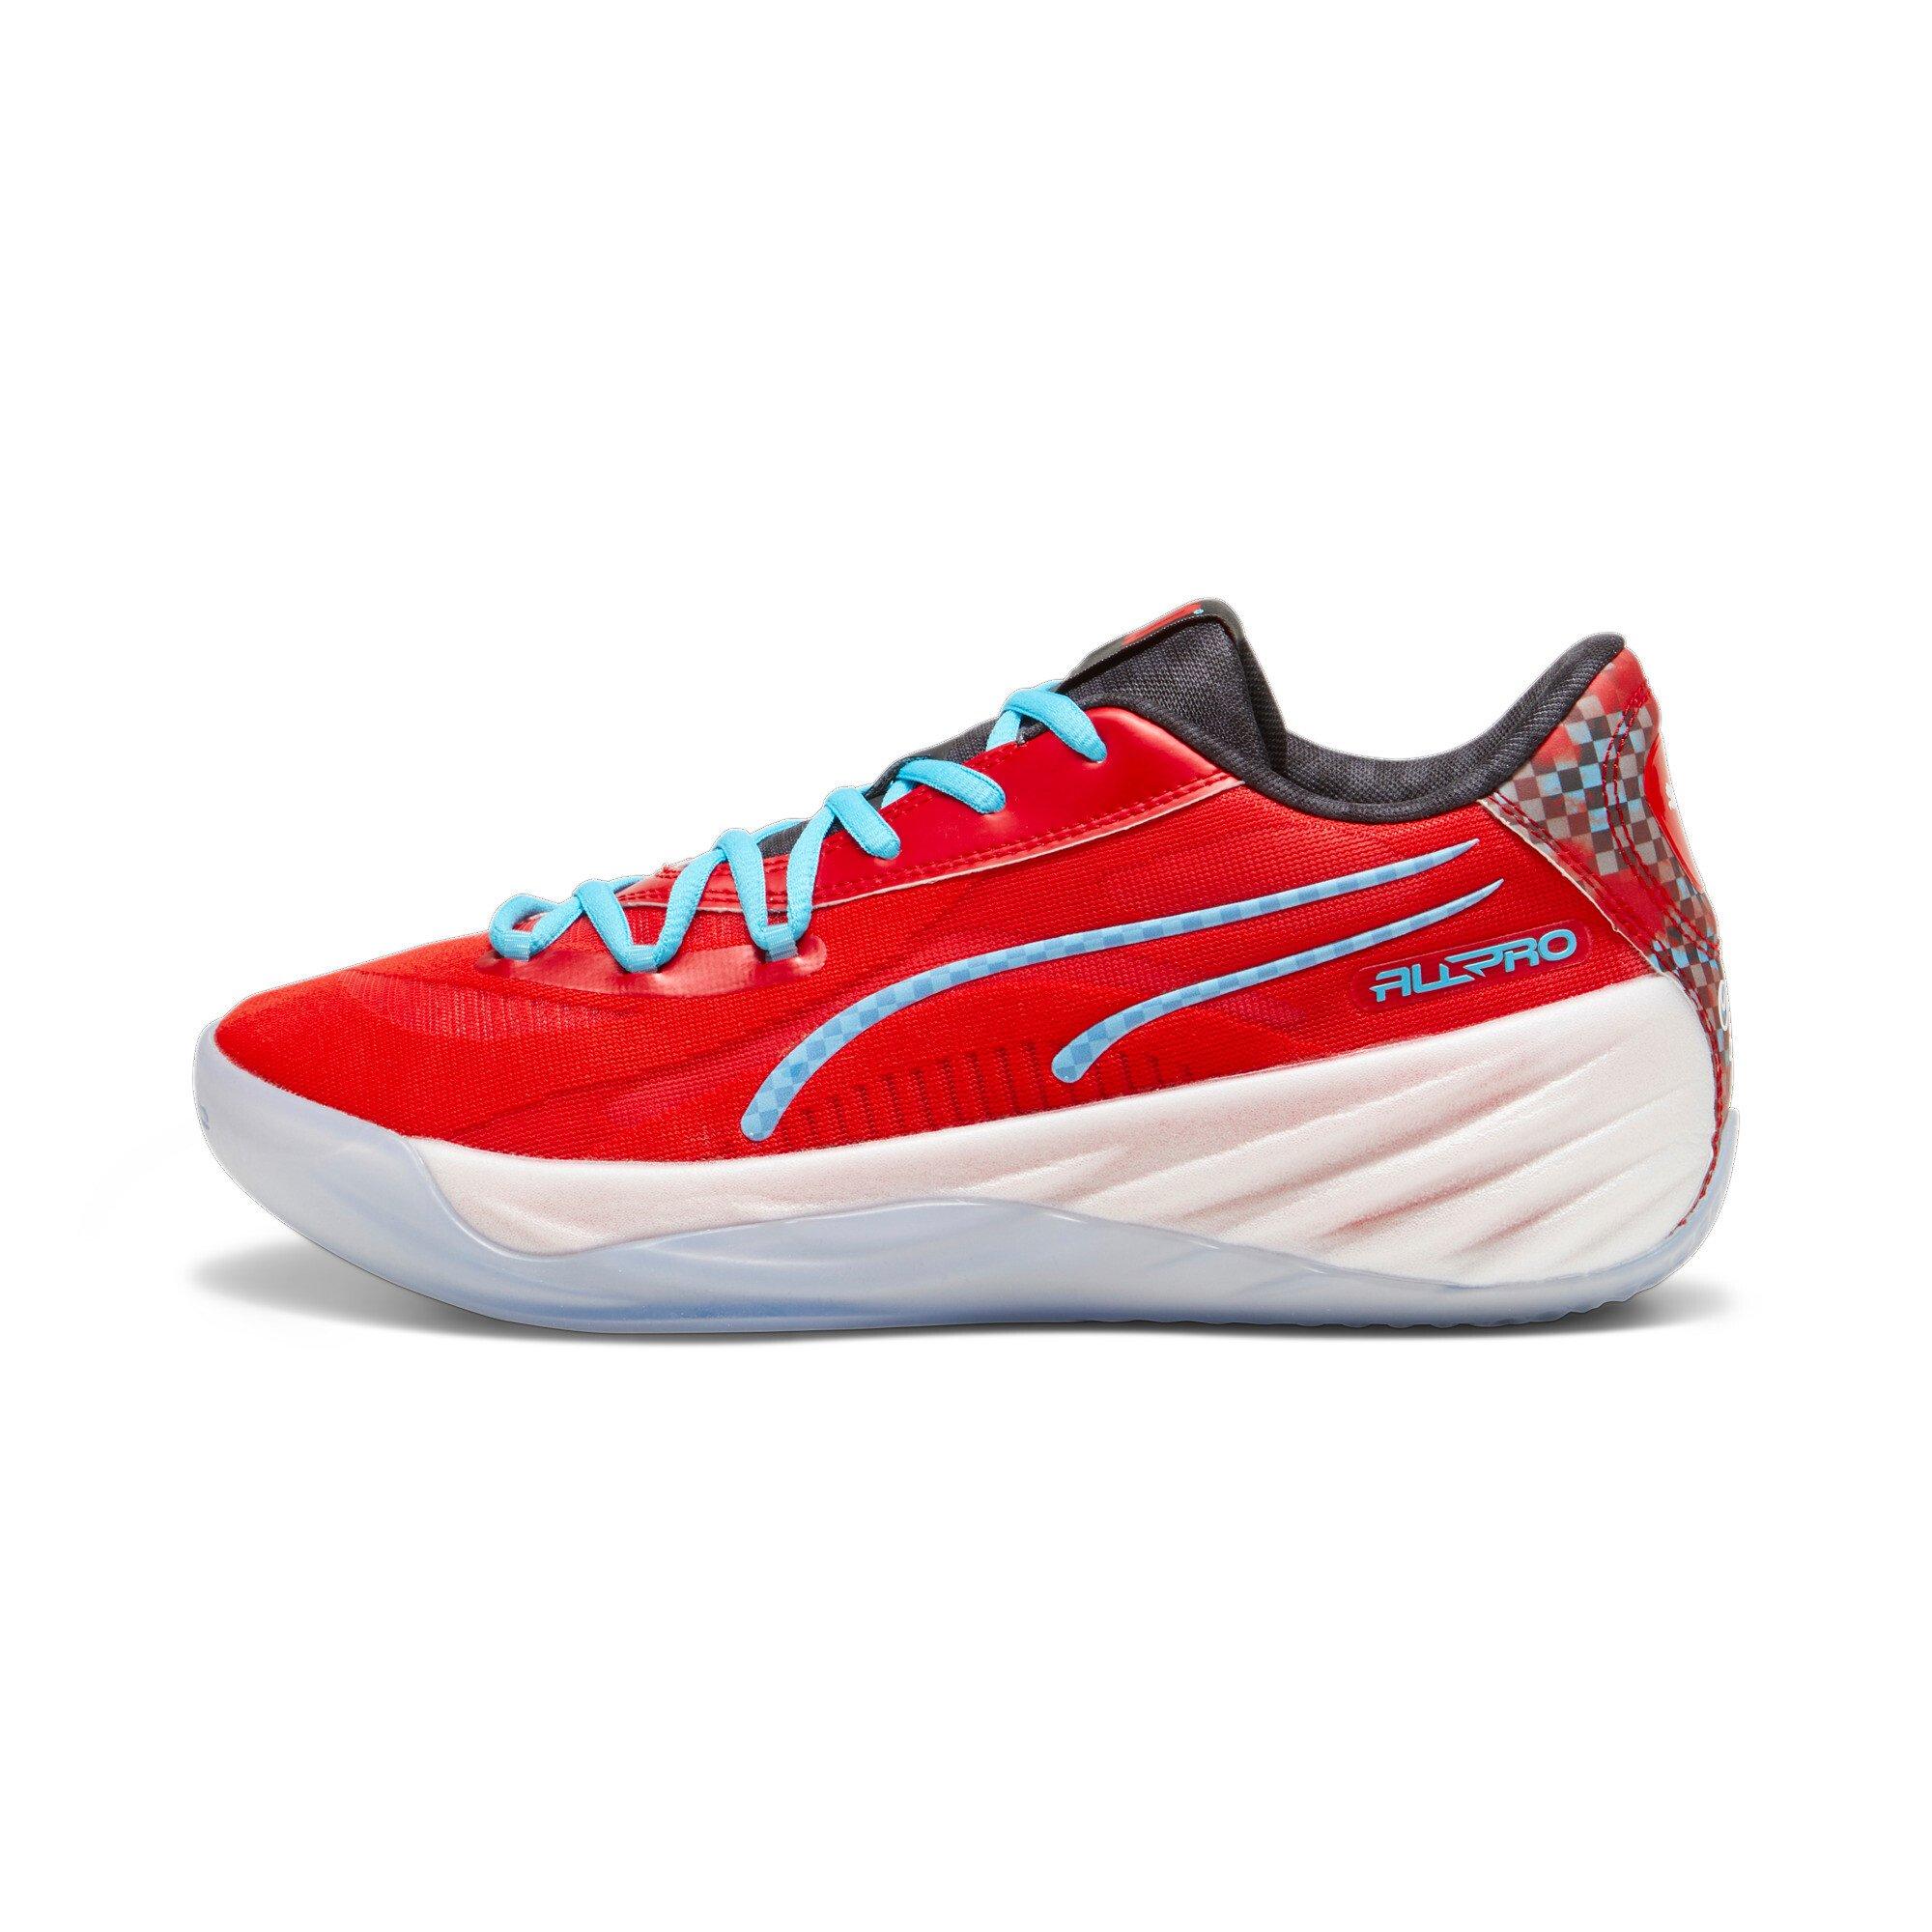 Men’s All-Pro Nitro Scoot Basketball Shoes